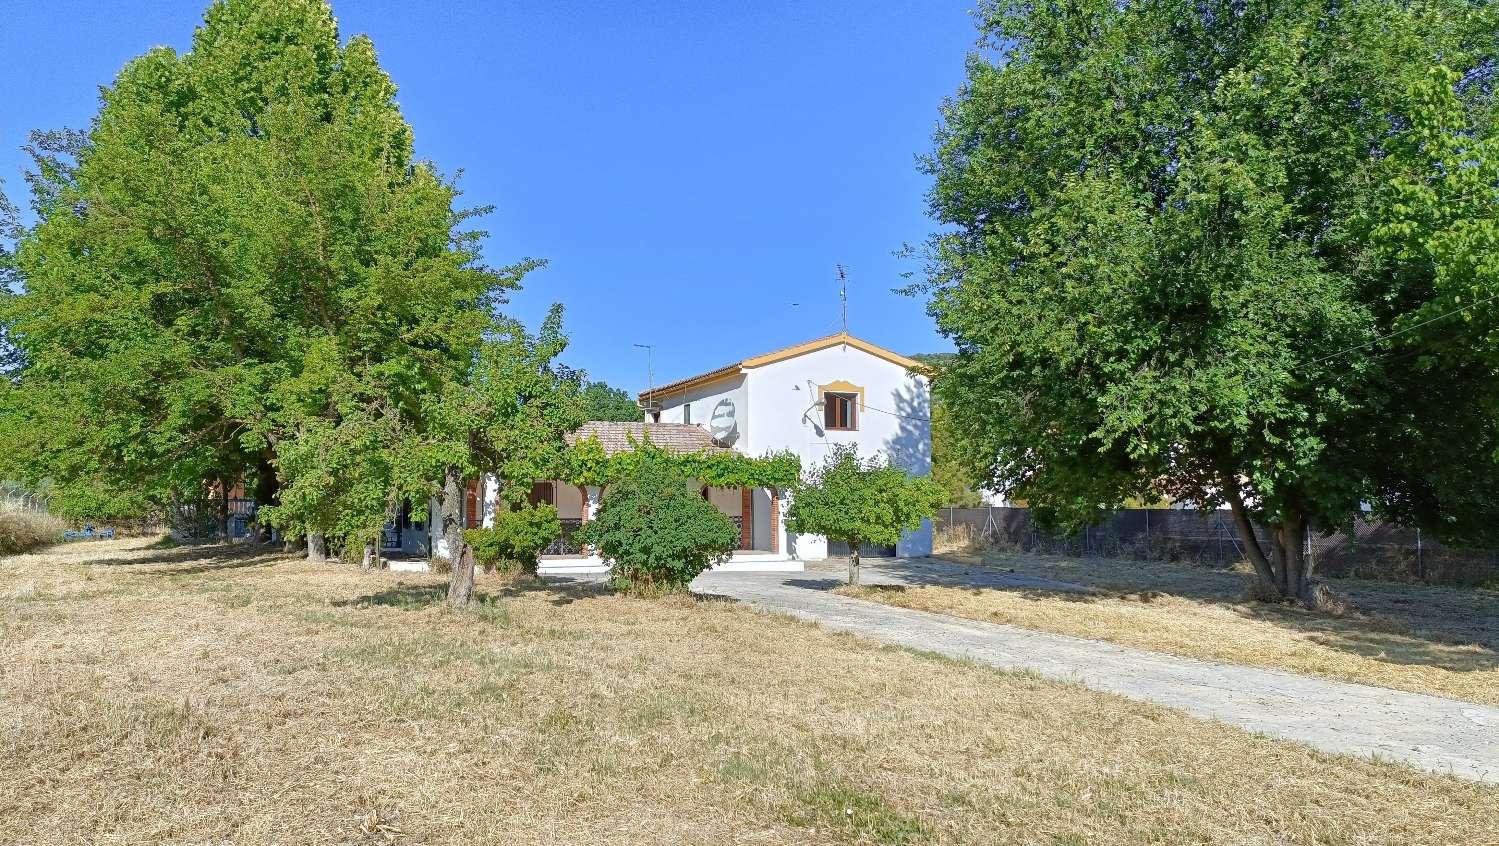 Detached country house with flat fenced land, pool, near the village